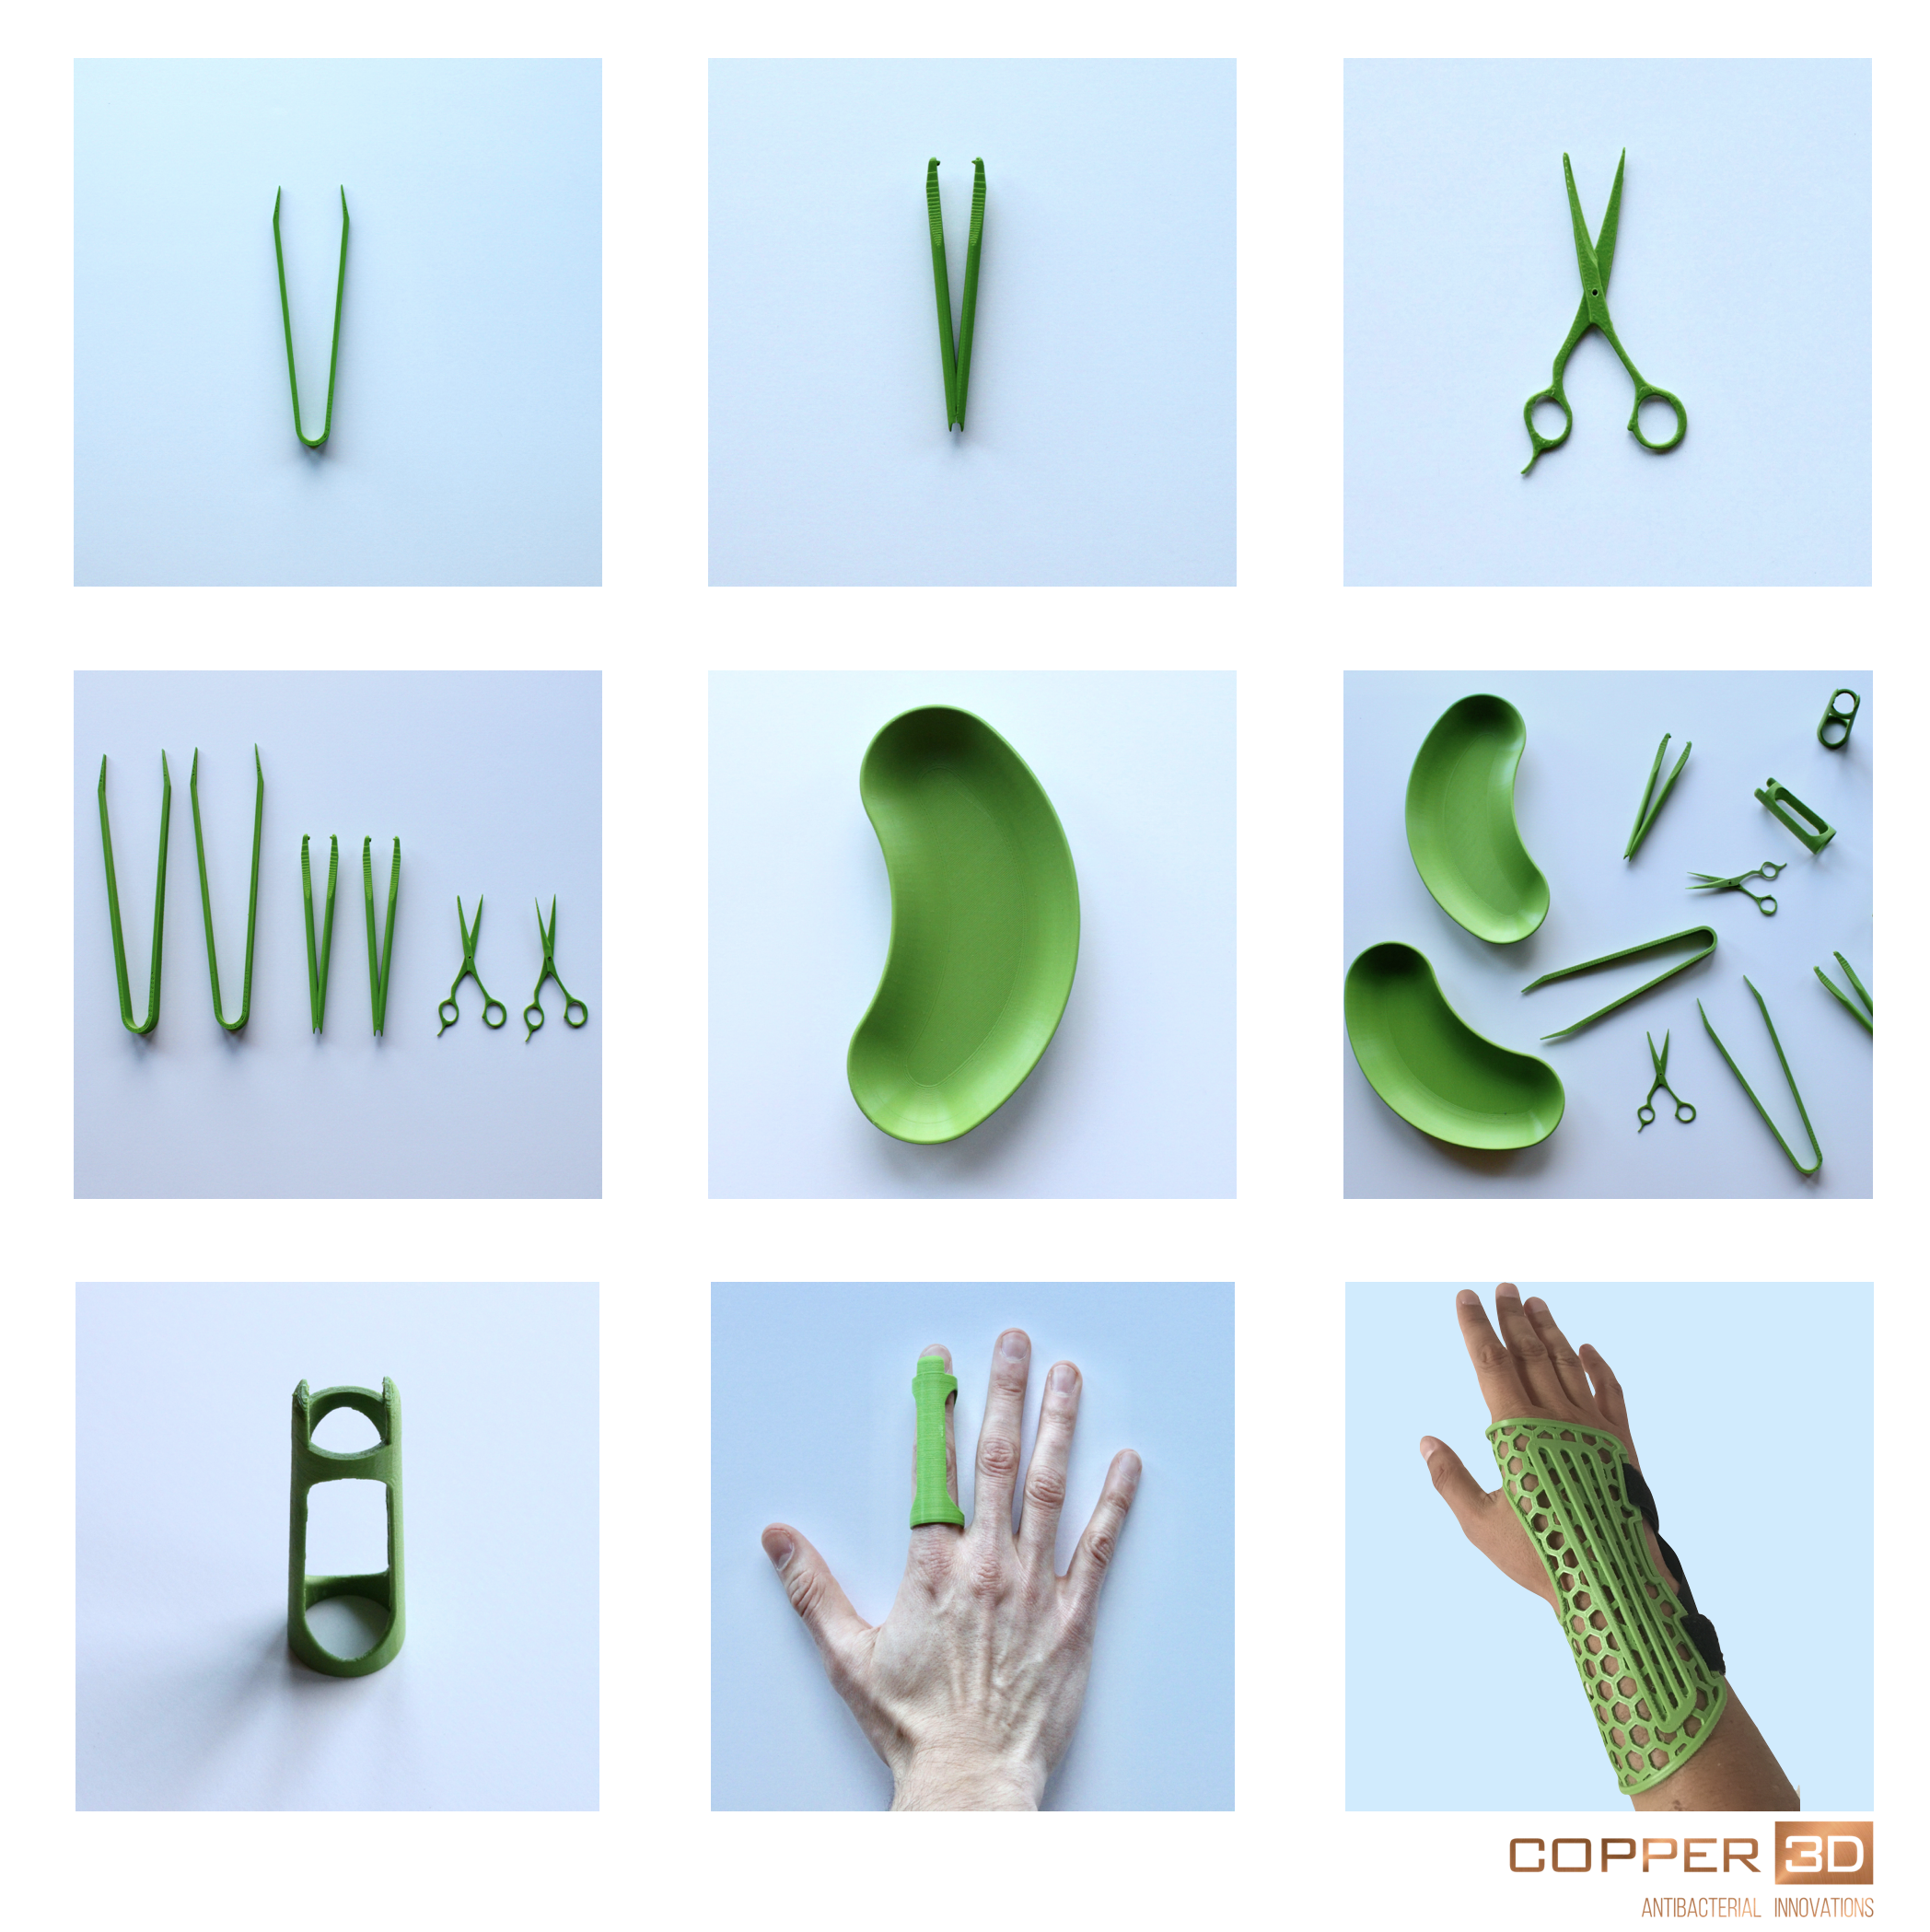 3D printed medical devices by Copper 3D. Image via Copper 3D.